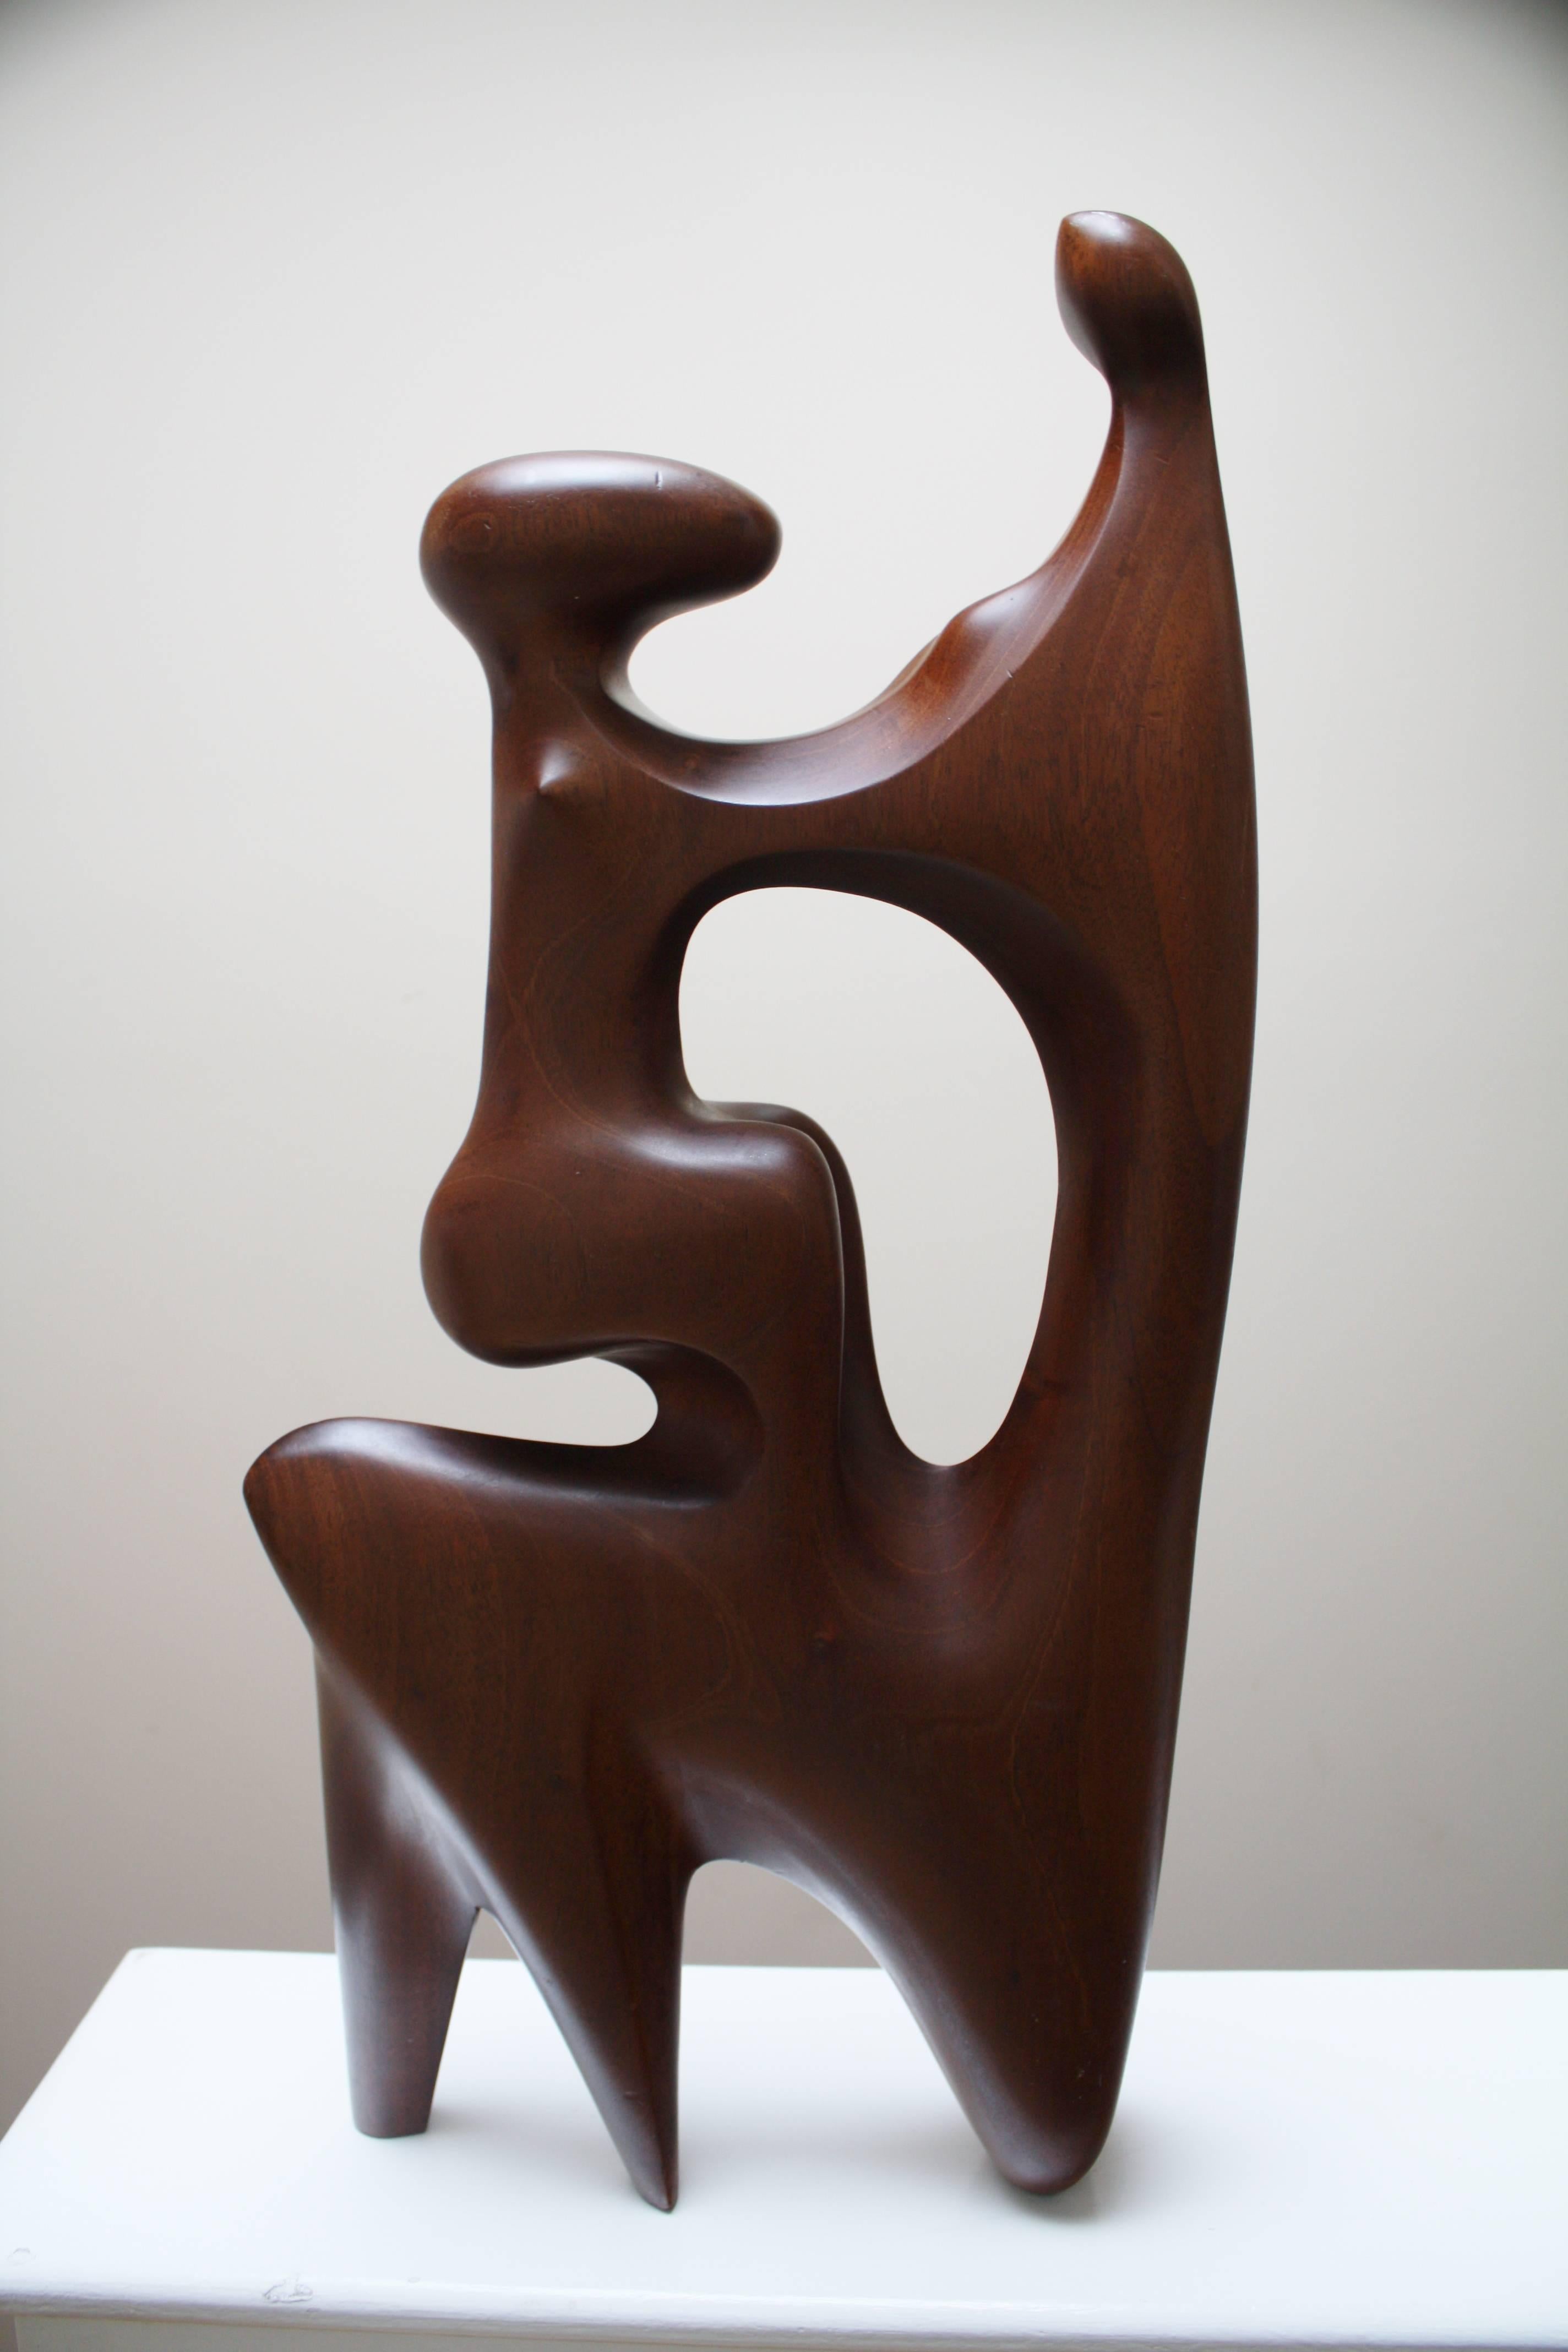 Large-scale abstract wood sculpture in the form of 